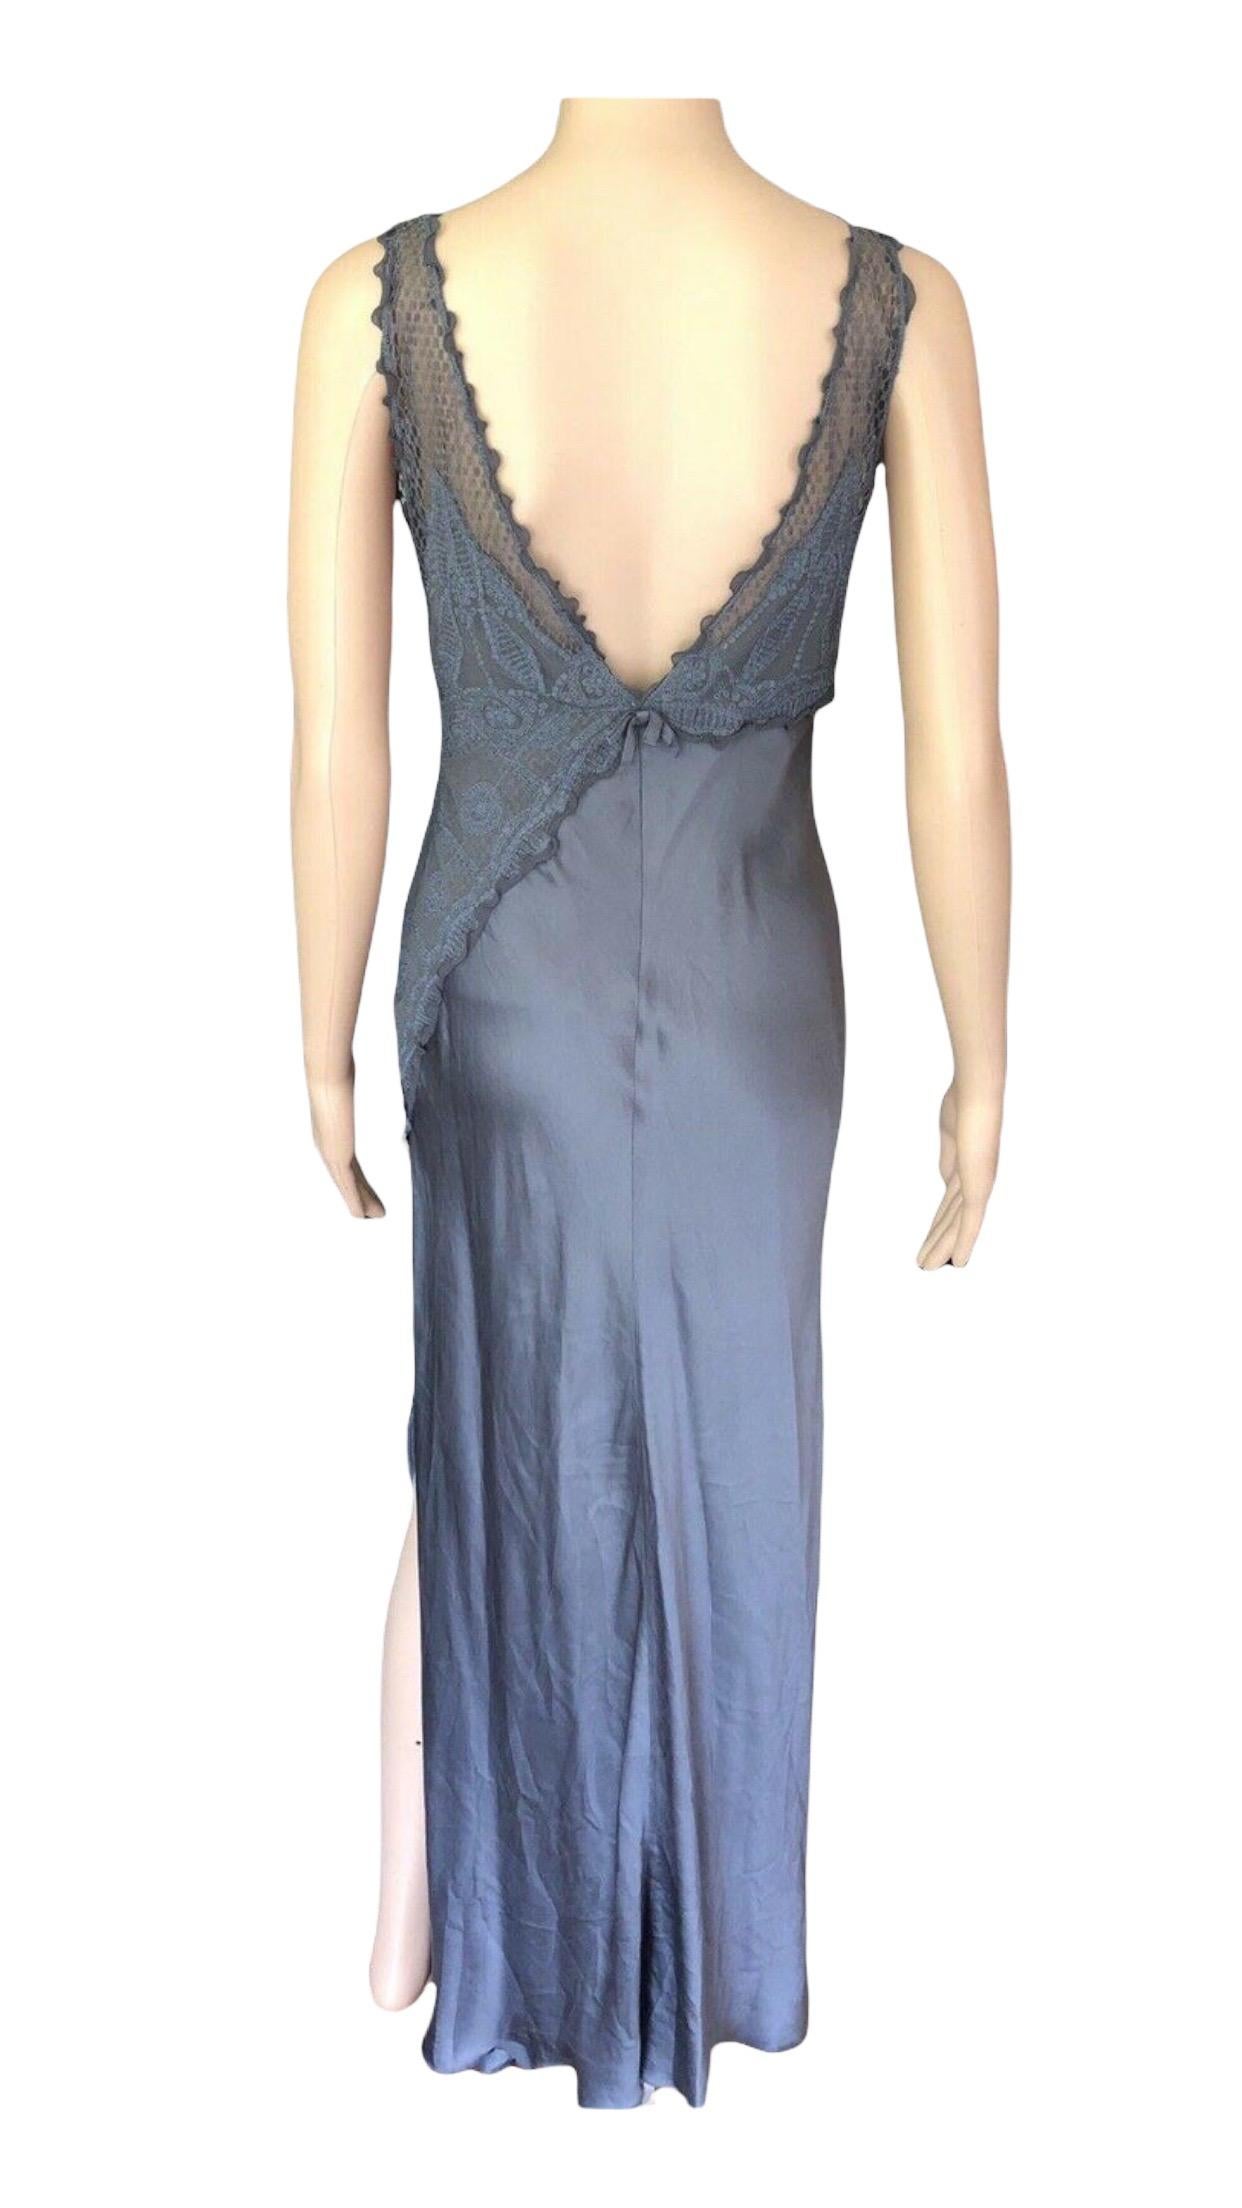 GIANNI VERSACE S/S 1997 Runway Vintage Satin Lace Embroidered Gown  For Sale 4